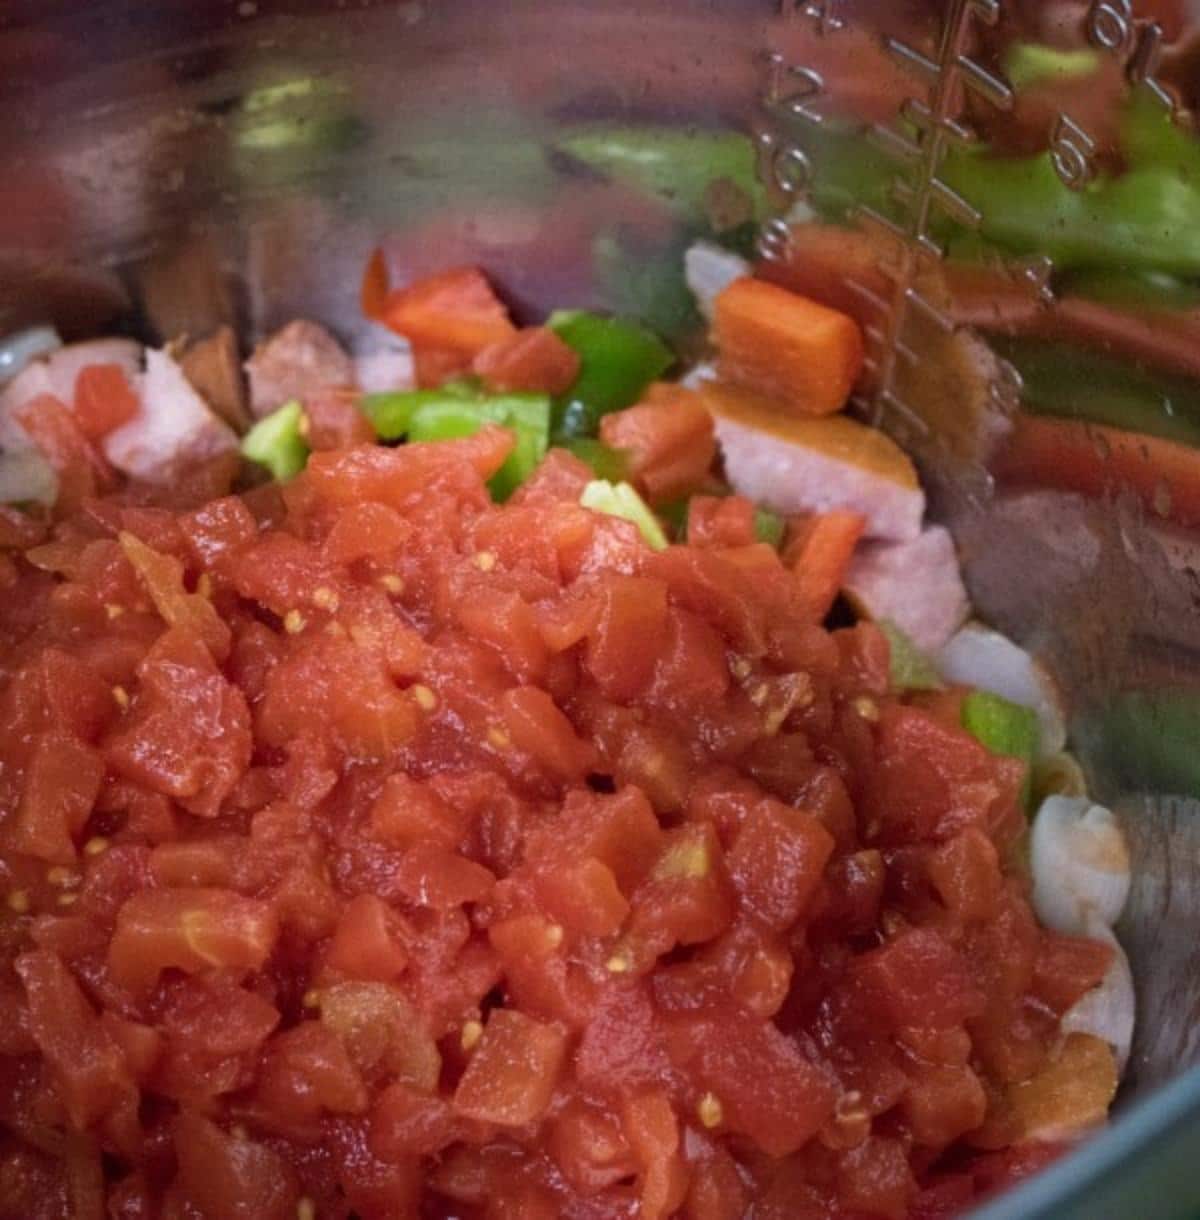 Diced bell peppers, onions, sausage and tomatoes in an instant pot.